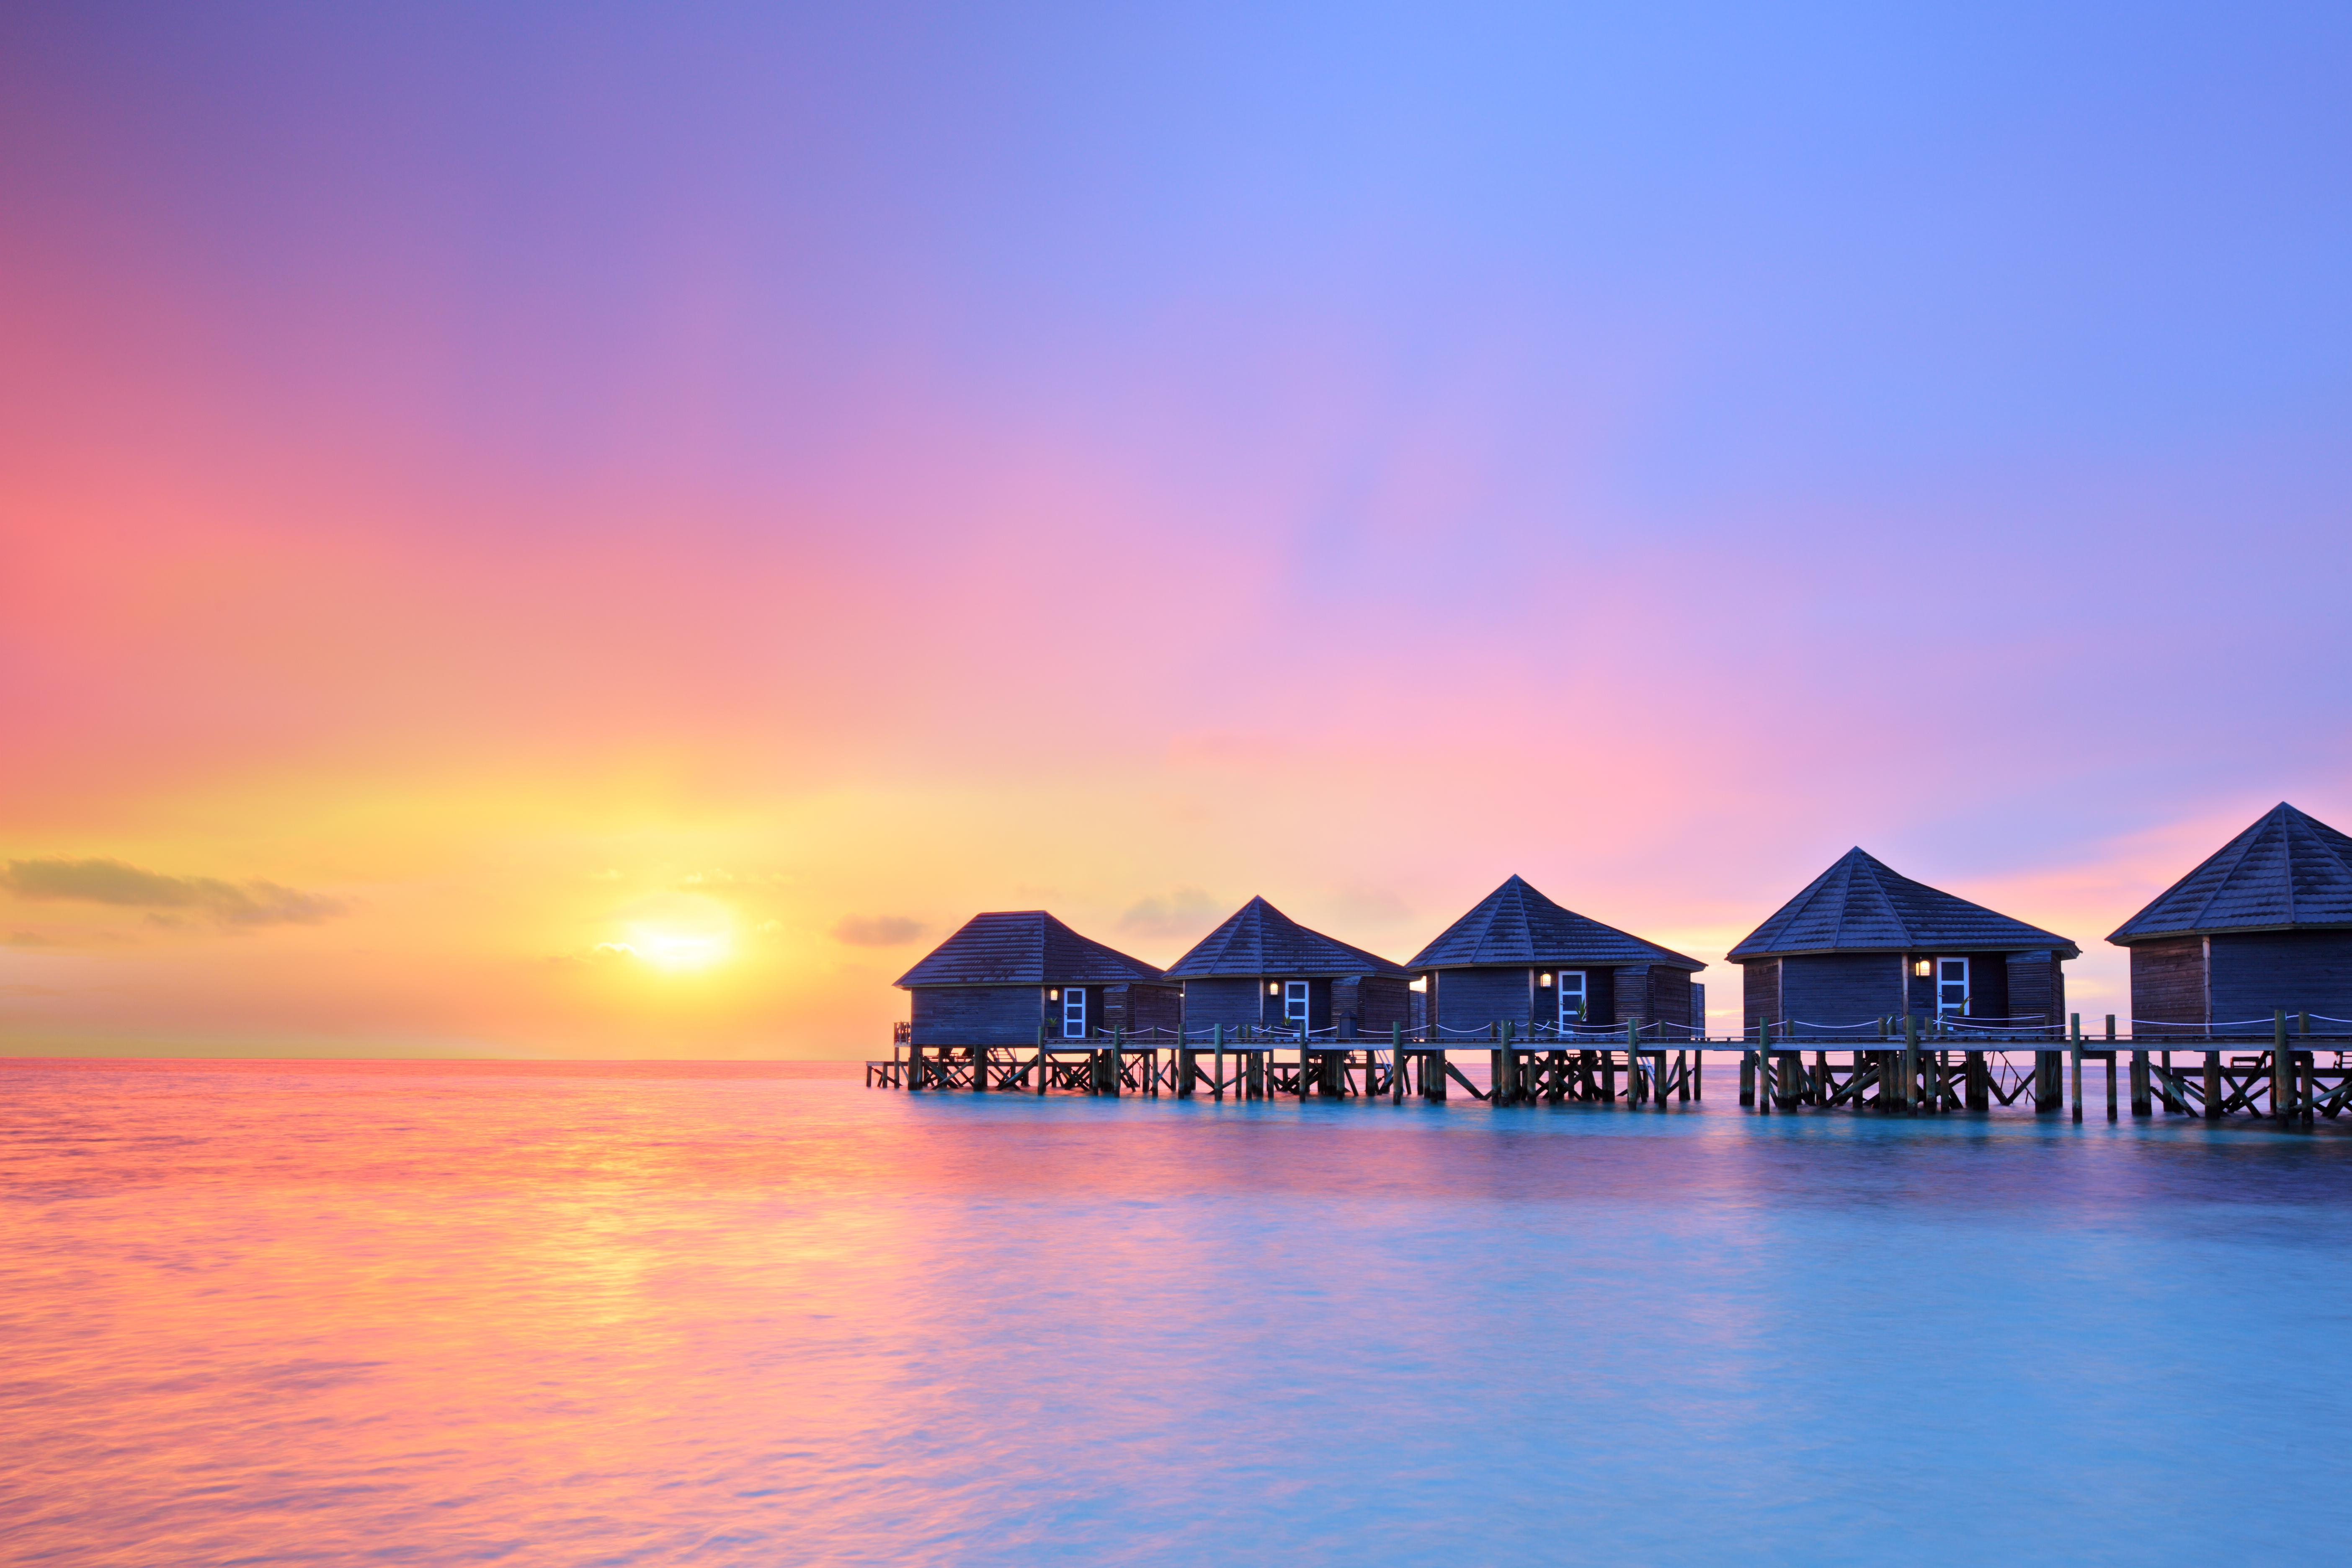 Sunset on Maldives island is a stunning site to behold.